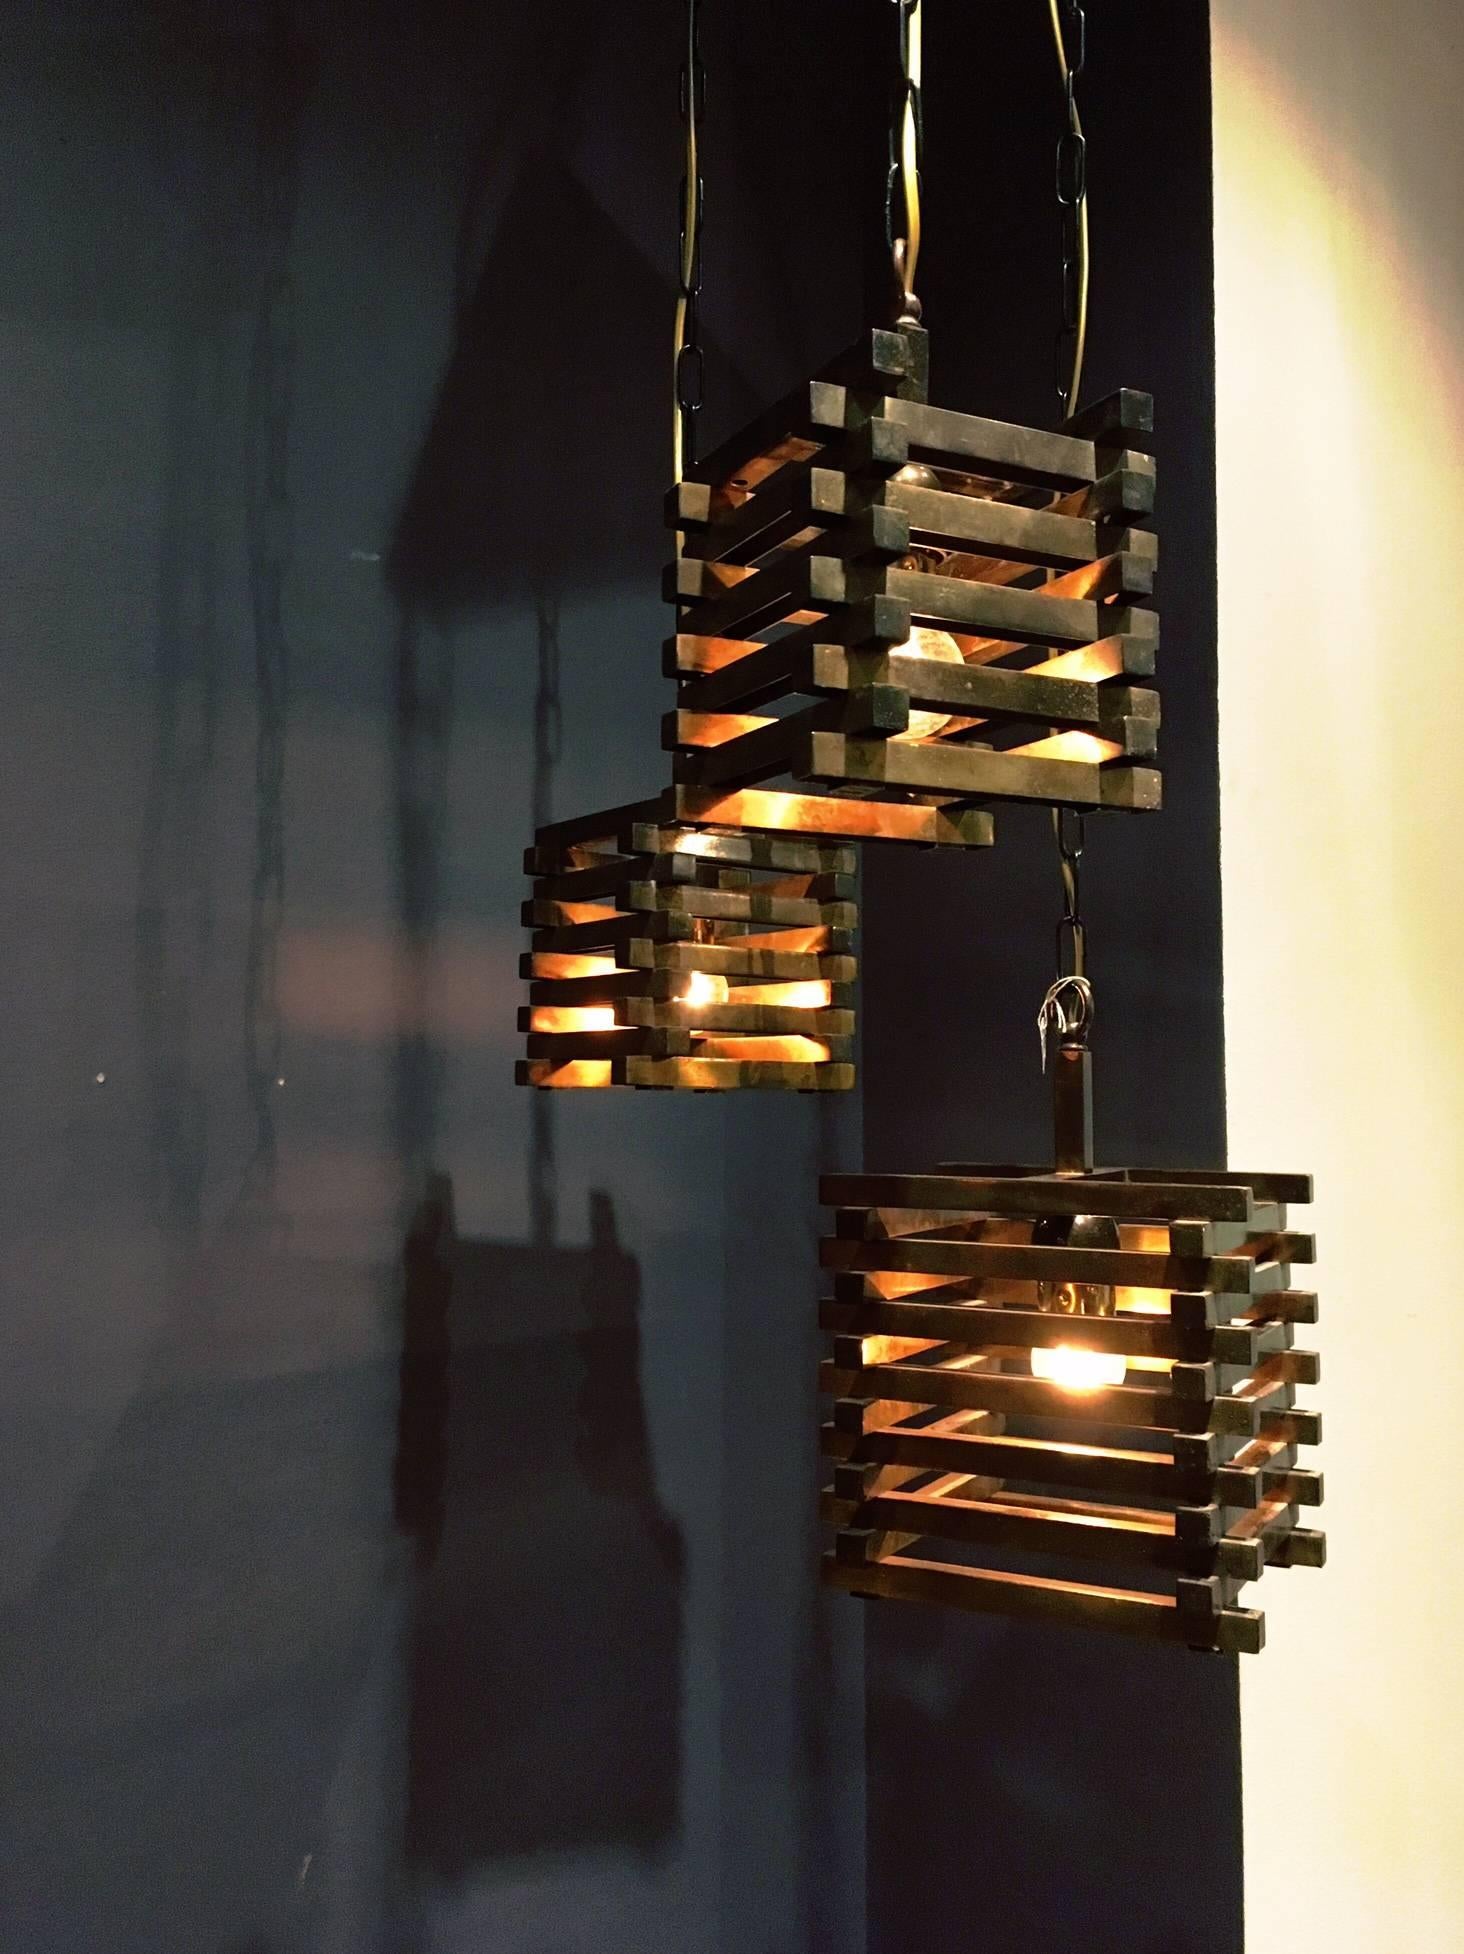 Chandelier out of three brass cube pendants. The largest cube is 20 x 20 cm, the other two are 16 x 16 cm. Attributed to the Italian designer Romeo Rega.

The total length (of the longest chain and cube) is 101 cm.